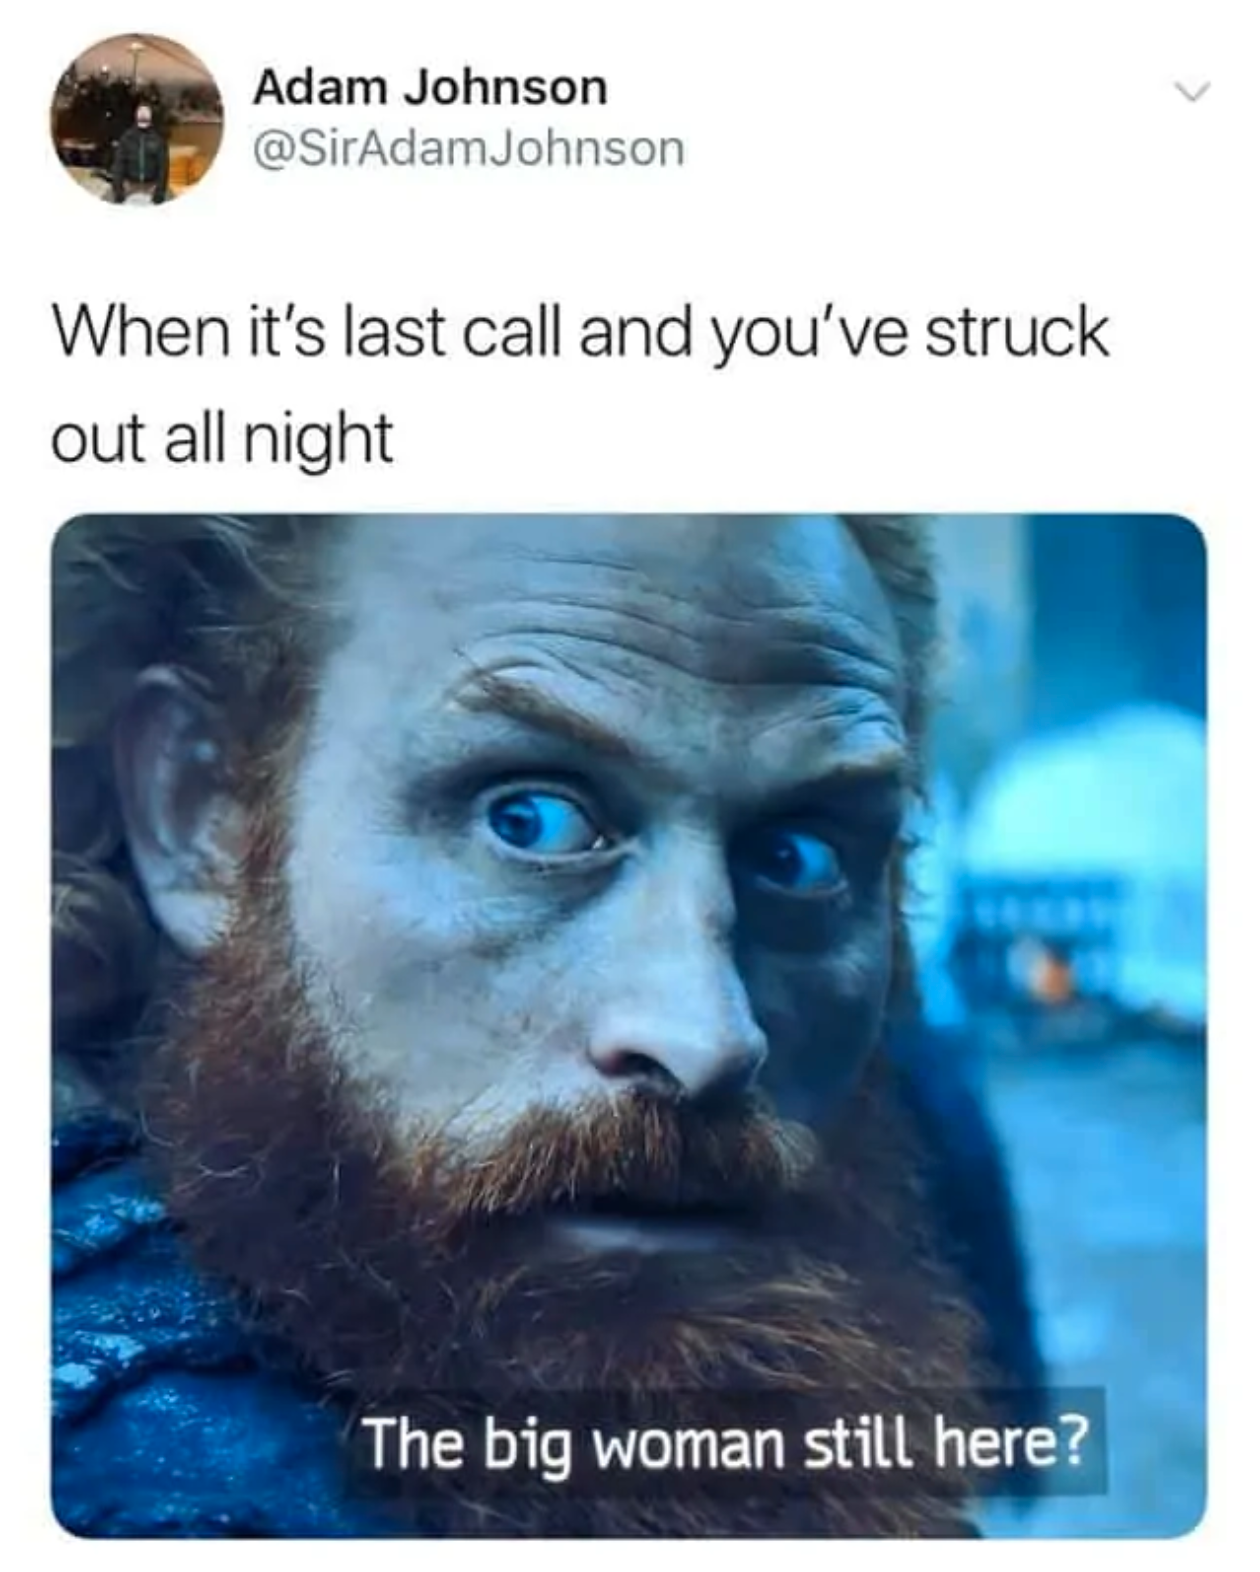 game of thrones night meme - When it's last call and you've struck out all night The big woman still here?